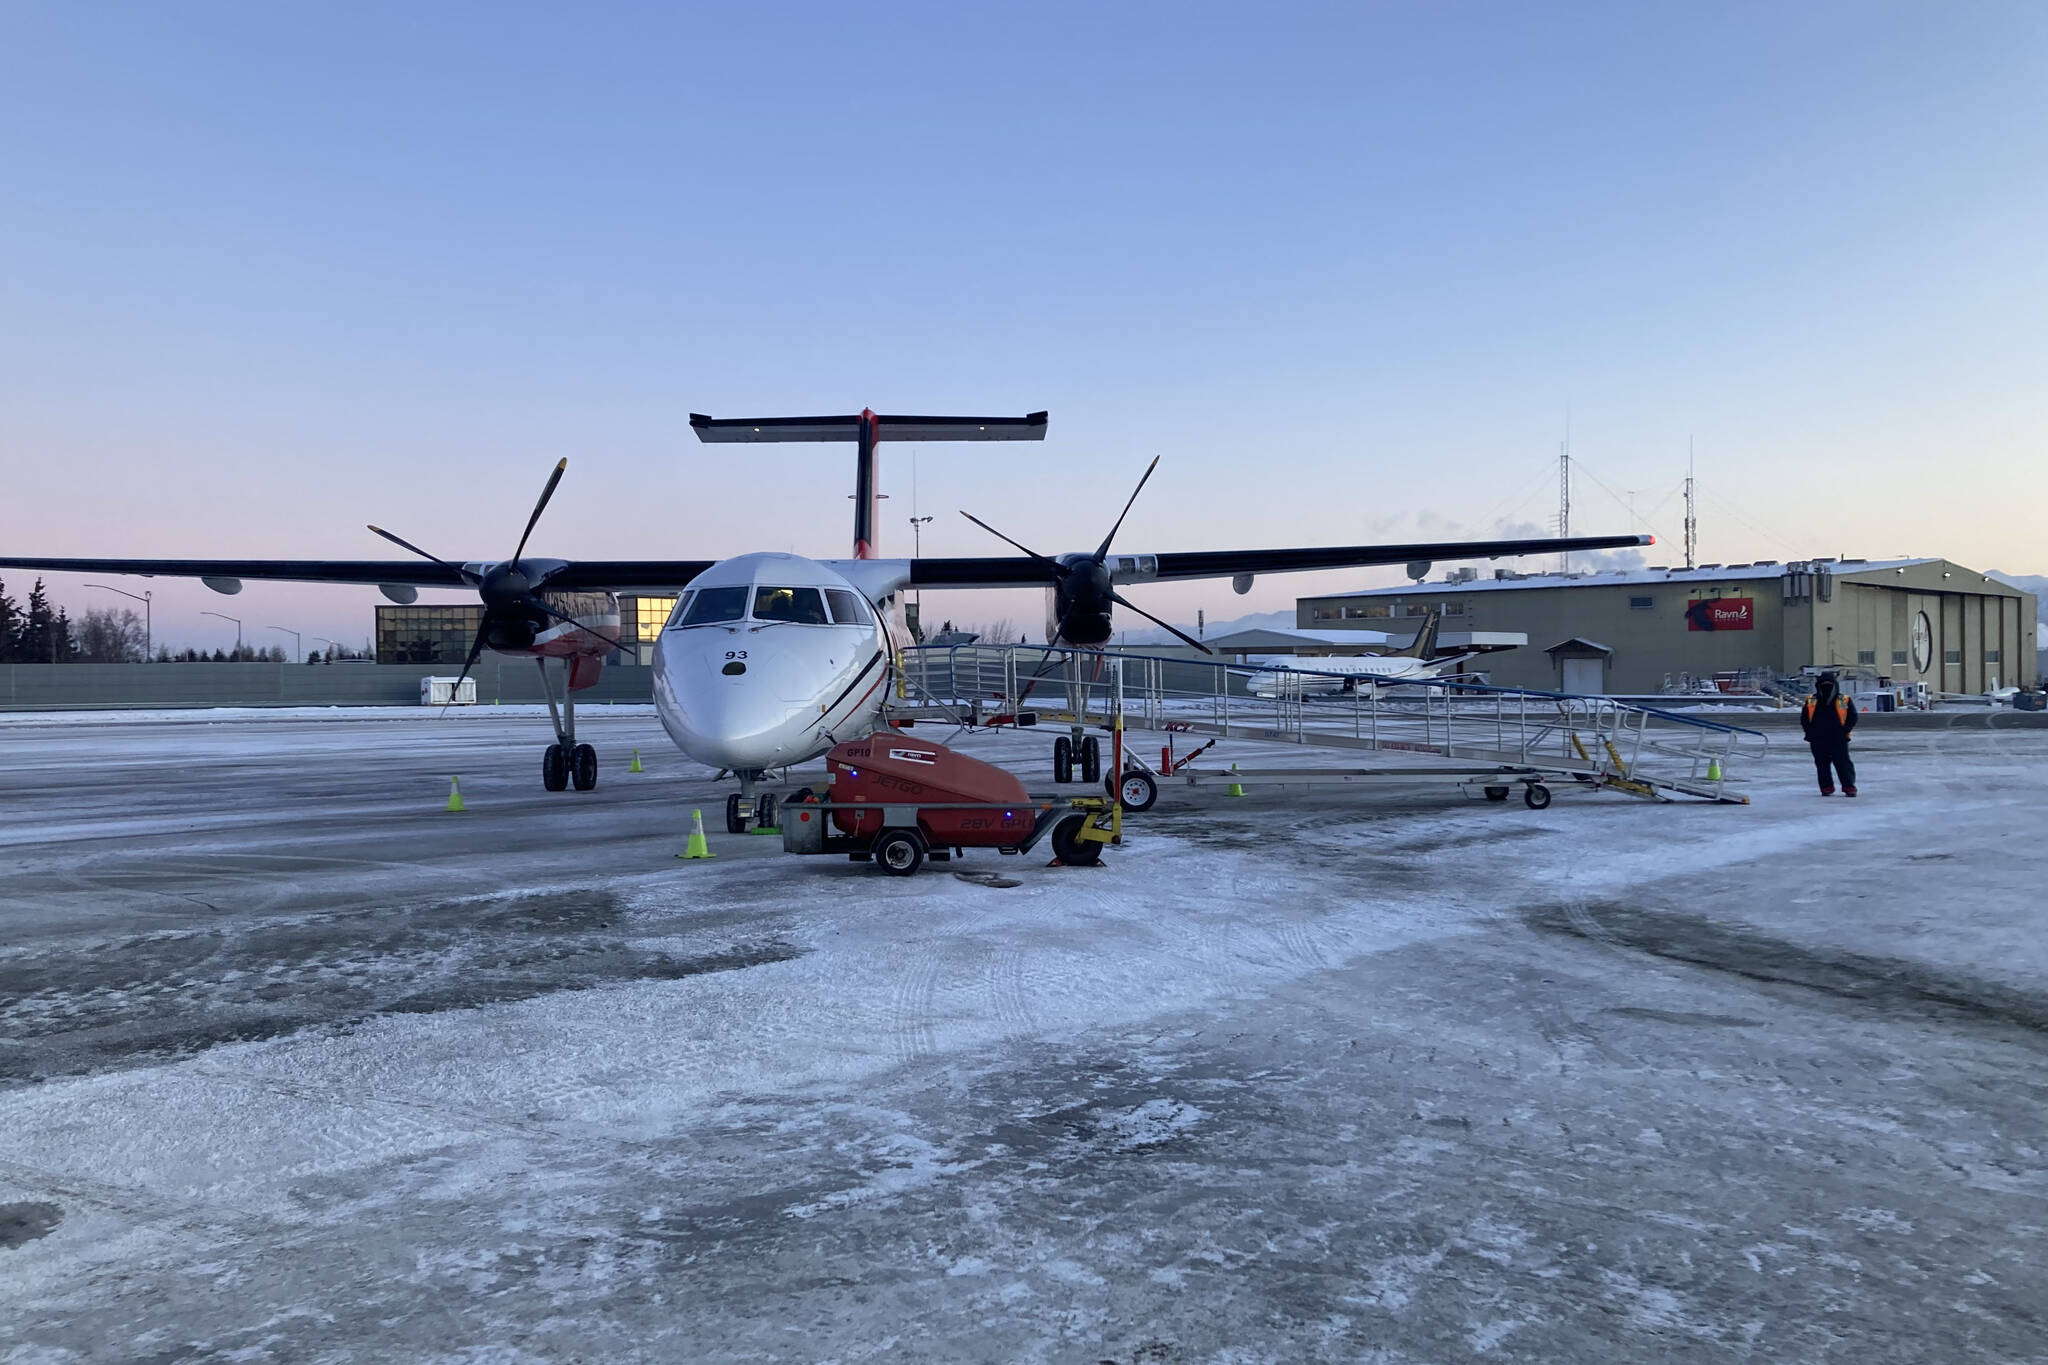 A Ravn Airlines plane arrives in Anchorage to transport passengers to Kenai after more than two hours of delay on Monday, Jan. 3, 2022. Windy conditions delayed flights to and from the peninsula over the weekend. (Camille Botello/Peninsula Clarion)”